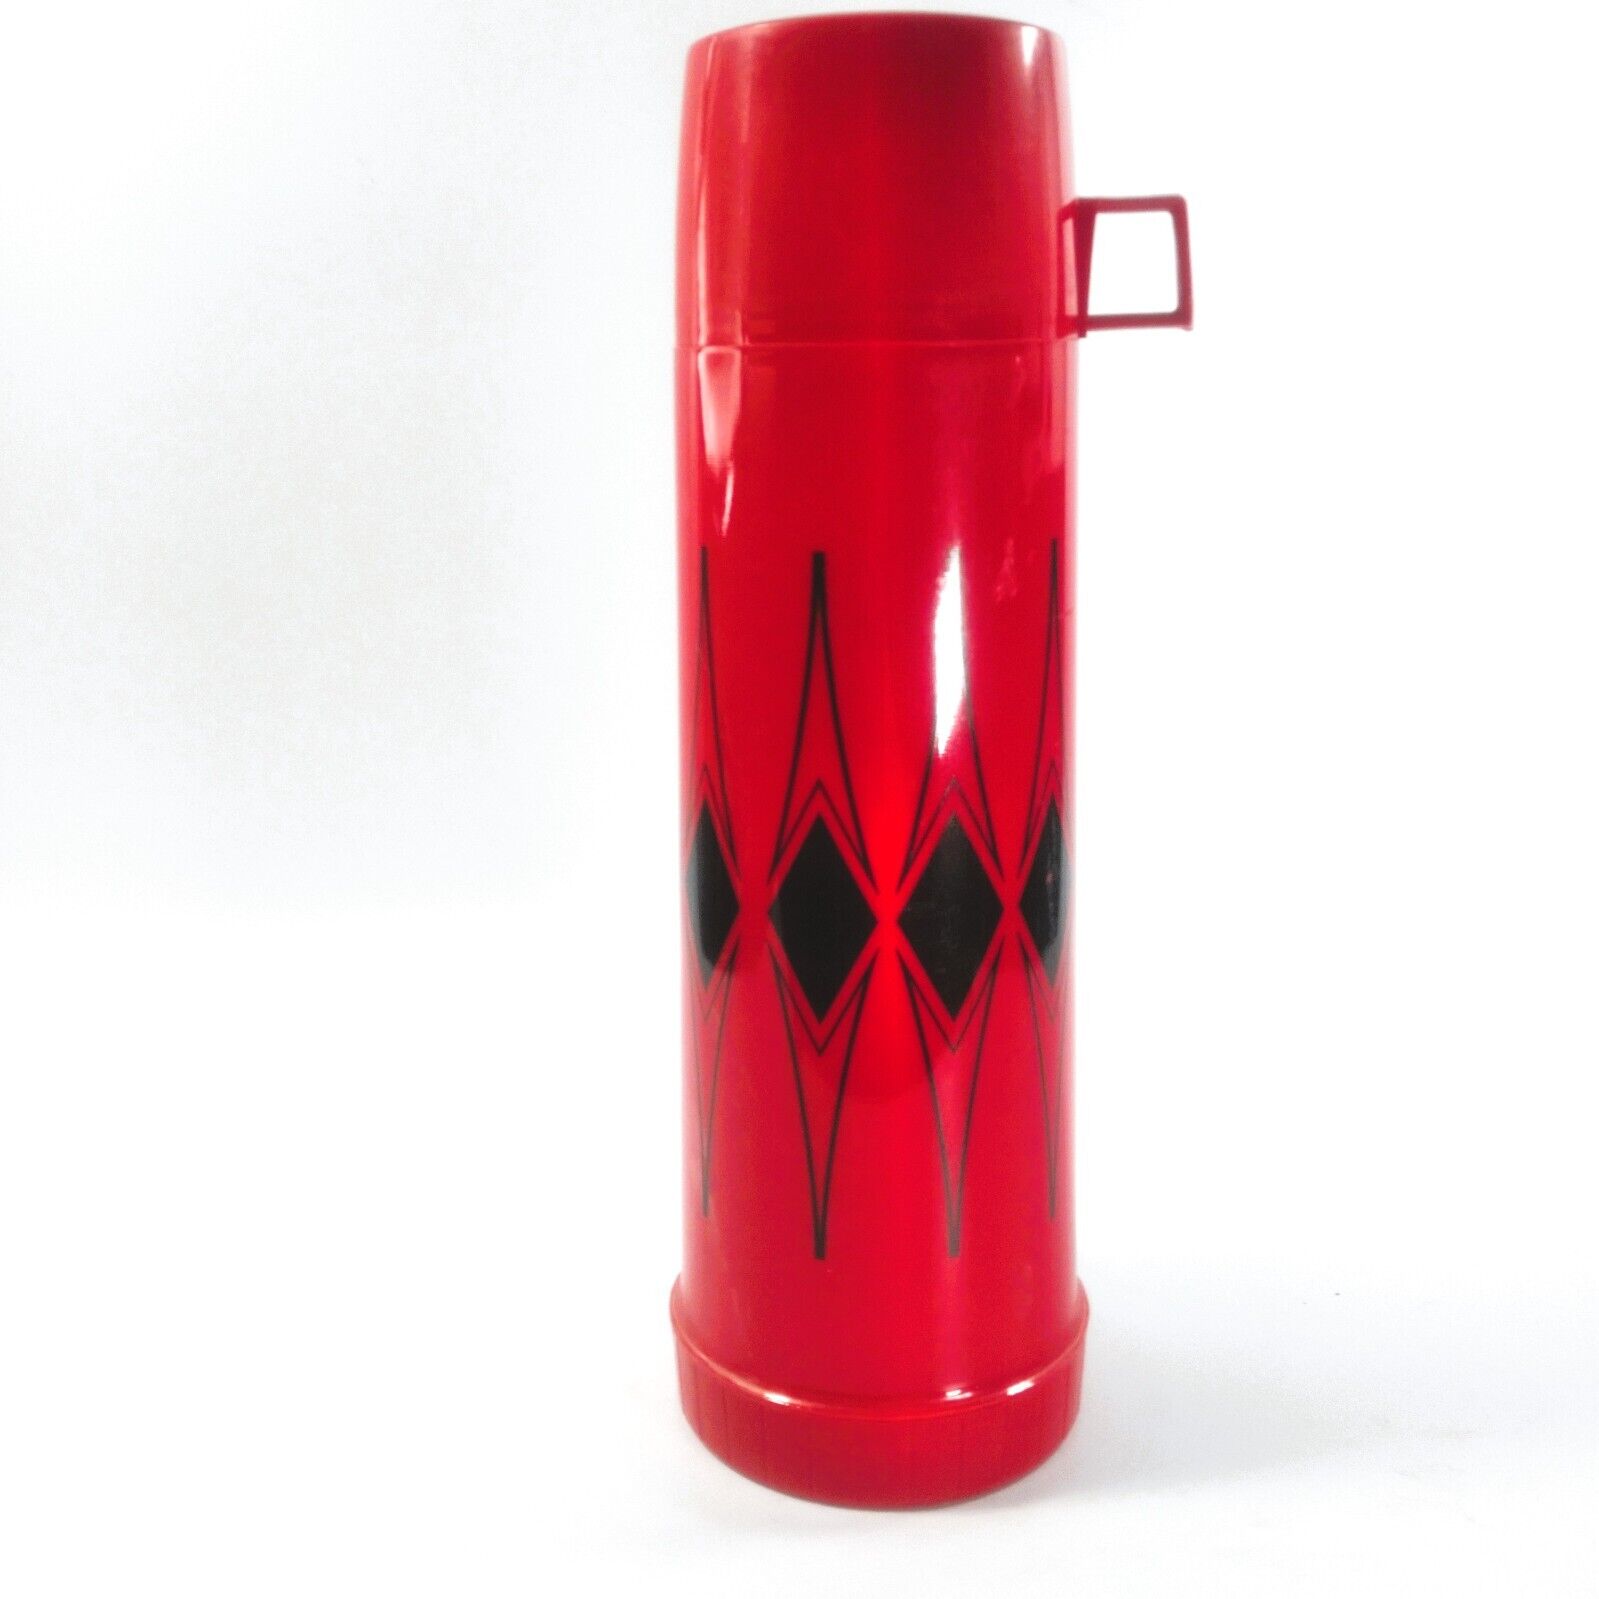 Aladdin Vanguard Quart Vintage Thermos Bottle Red Black 16 Oz Cup 13 Inches Tall